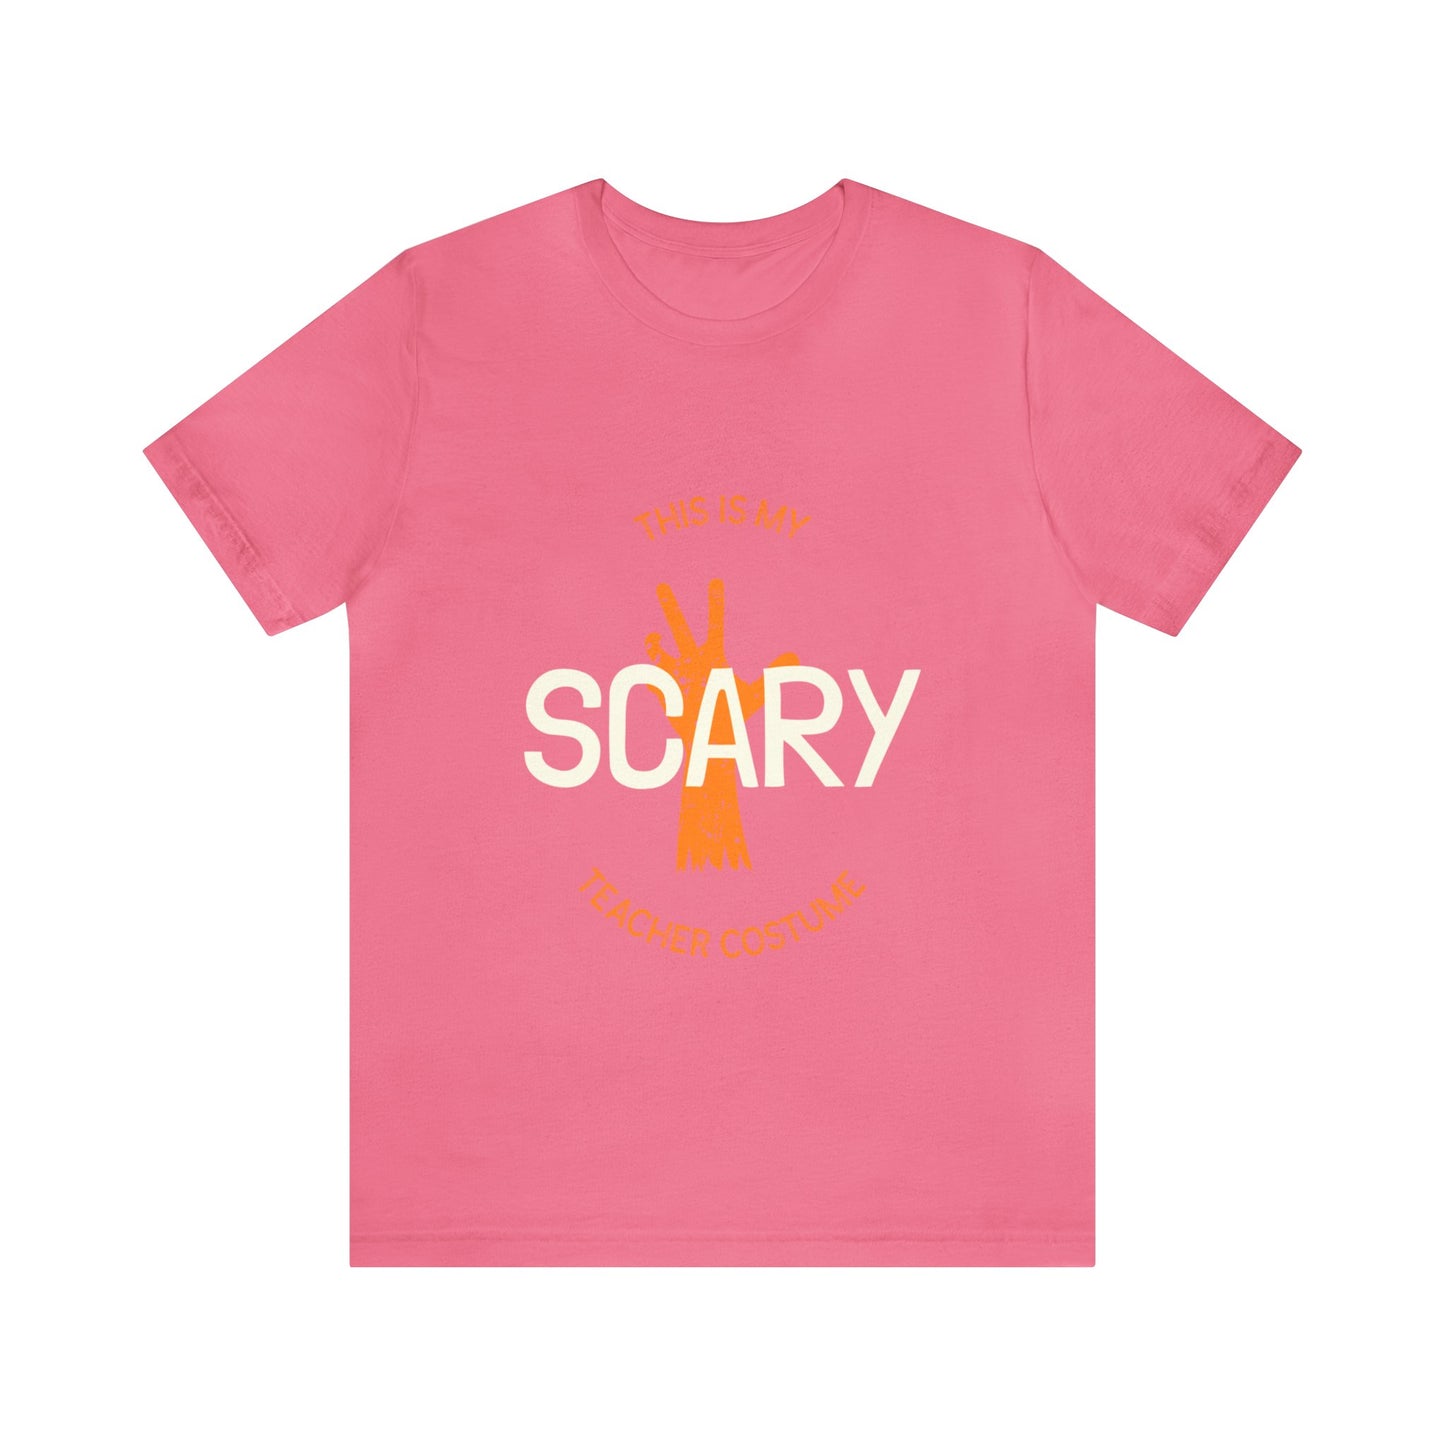 This Is My Scary Teacher Costume - Unisex T-Shirt